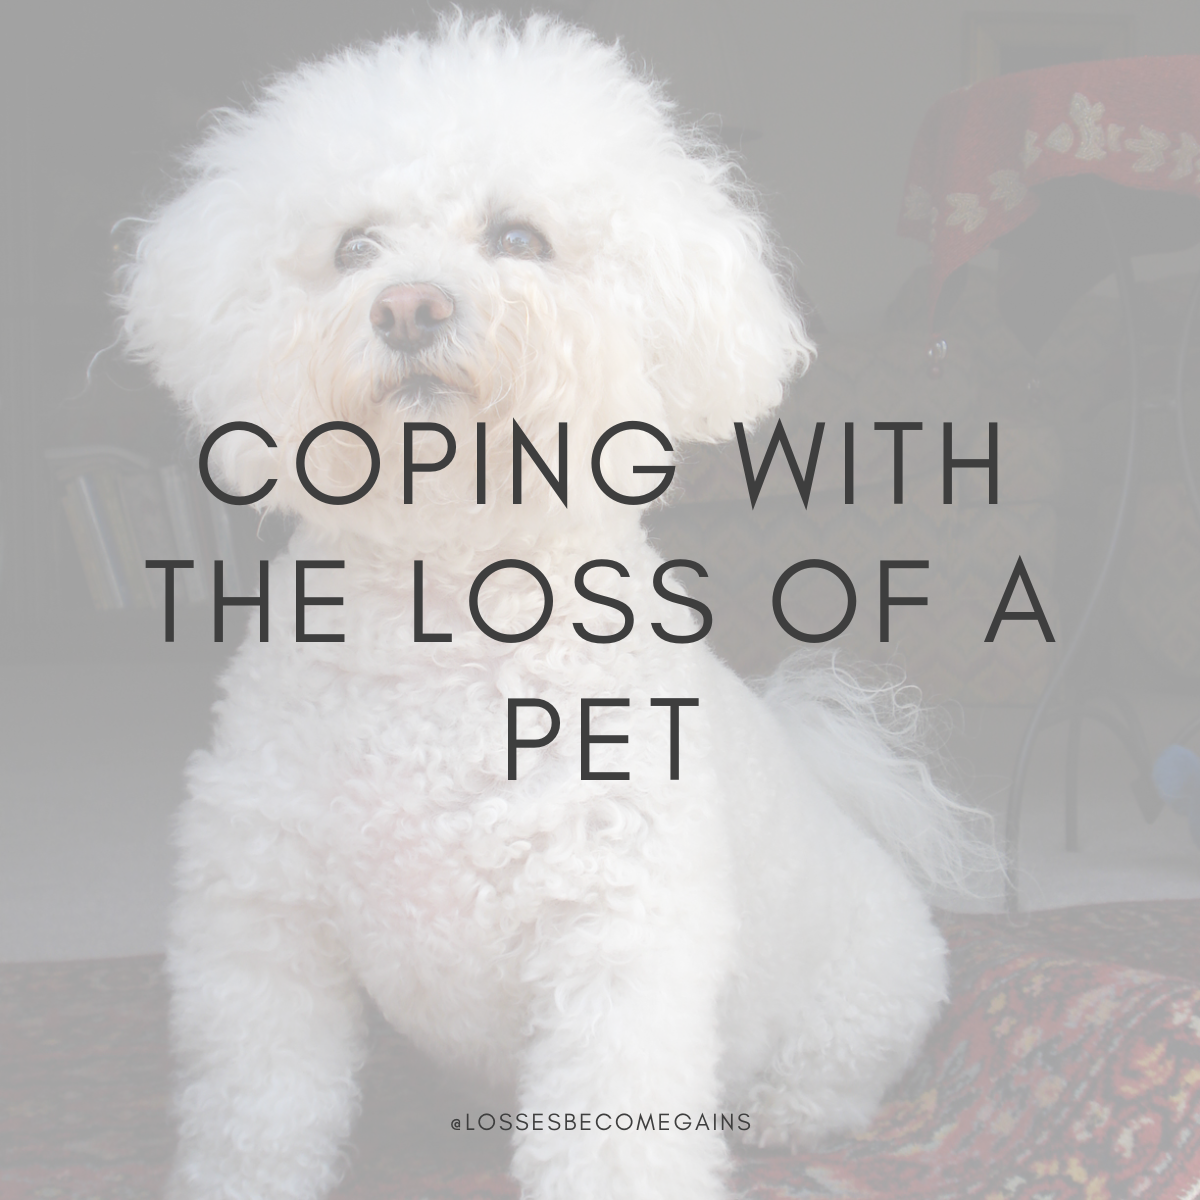 Coping with the loss of a pet by Losses Become Gains